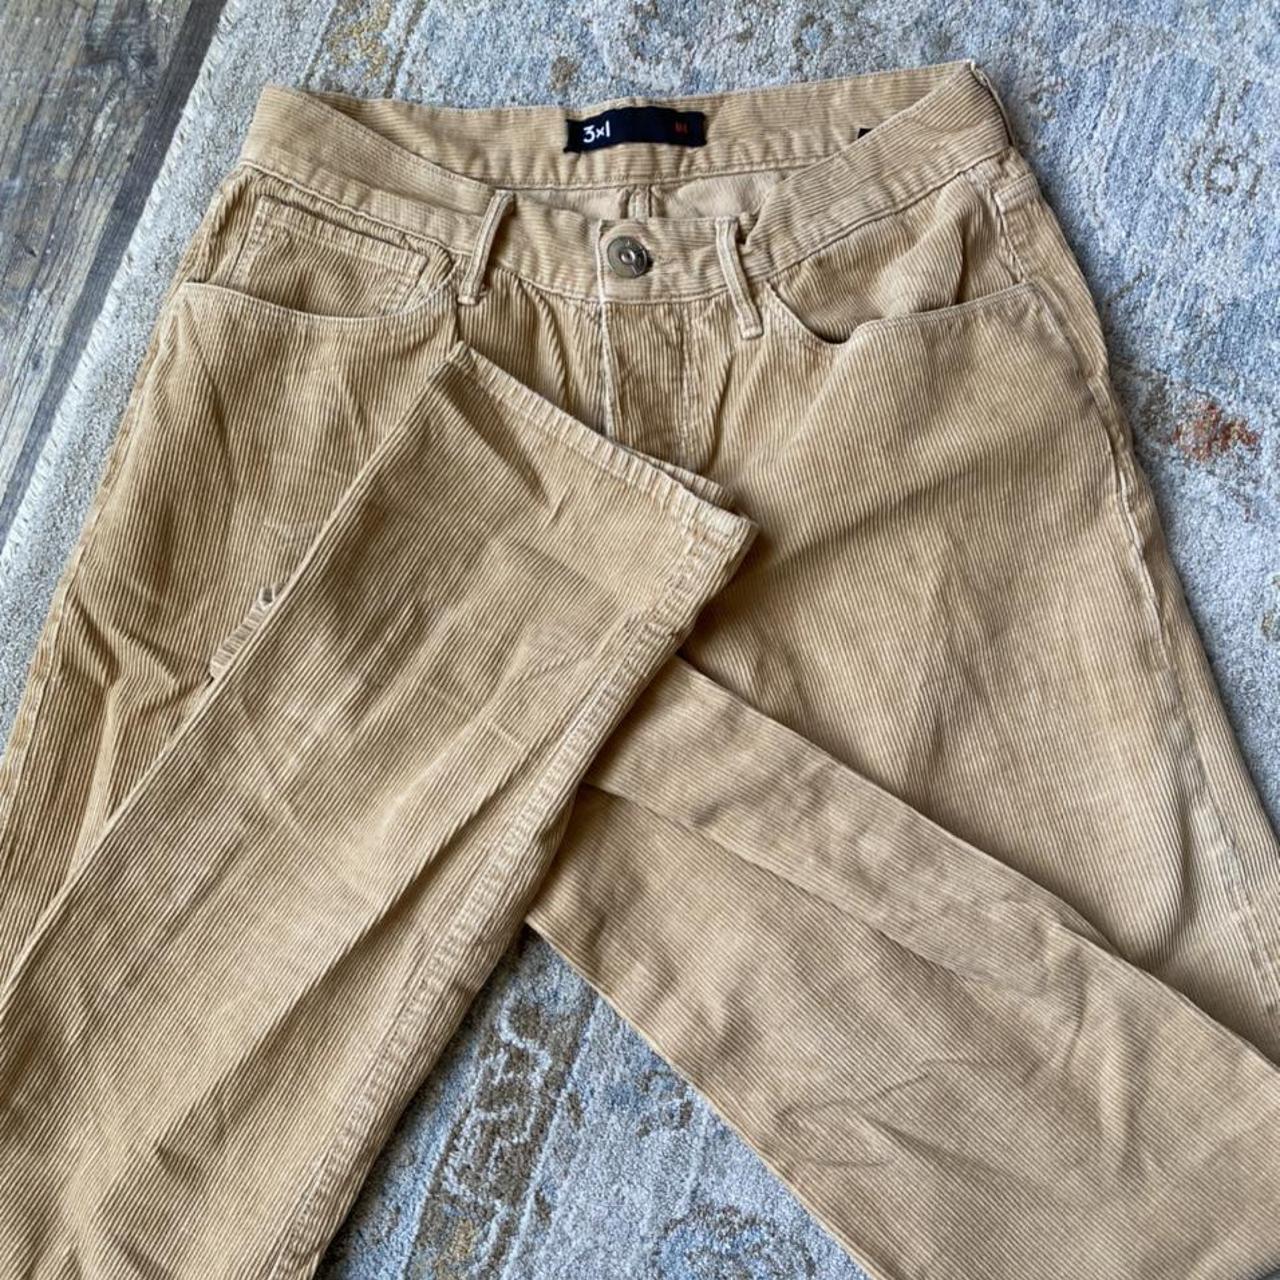 3x1 corduroy pants Super cute perfect for the fall - Depop